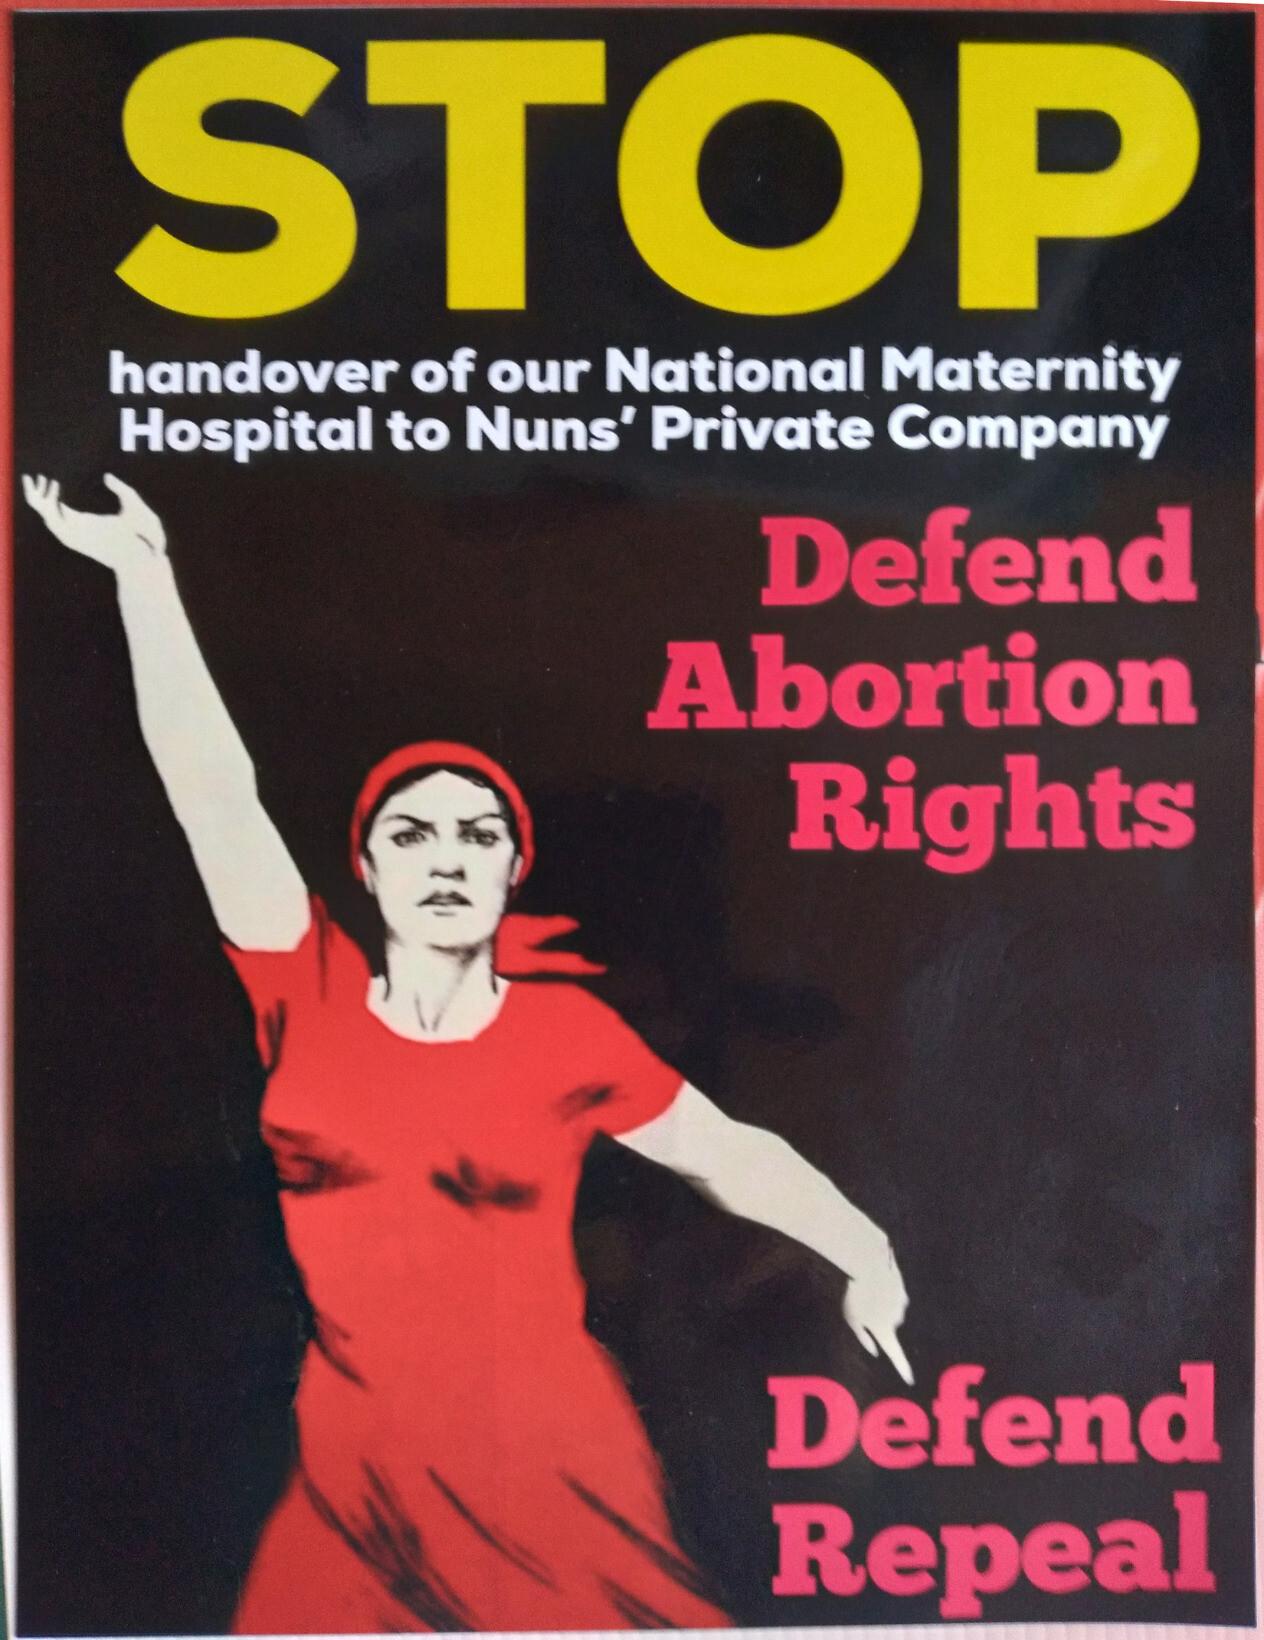 A poster reading: Stop Handover of Our National Maternity Hospital to Nuns’ Private Company / Defend Abortion Rights Defend Repeal and featuring an iconic image of a woman in a red dress and red bandana.